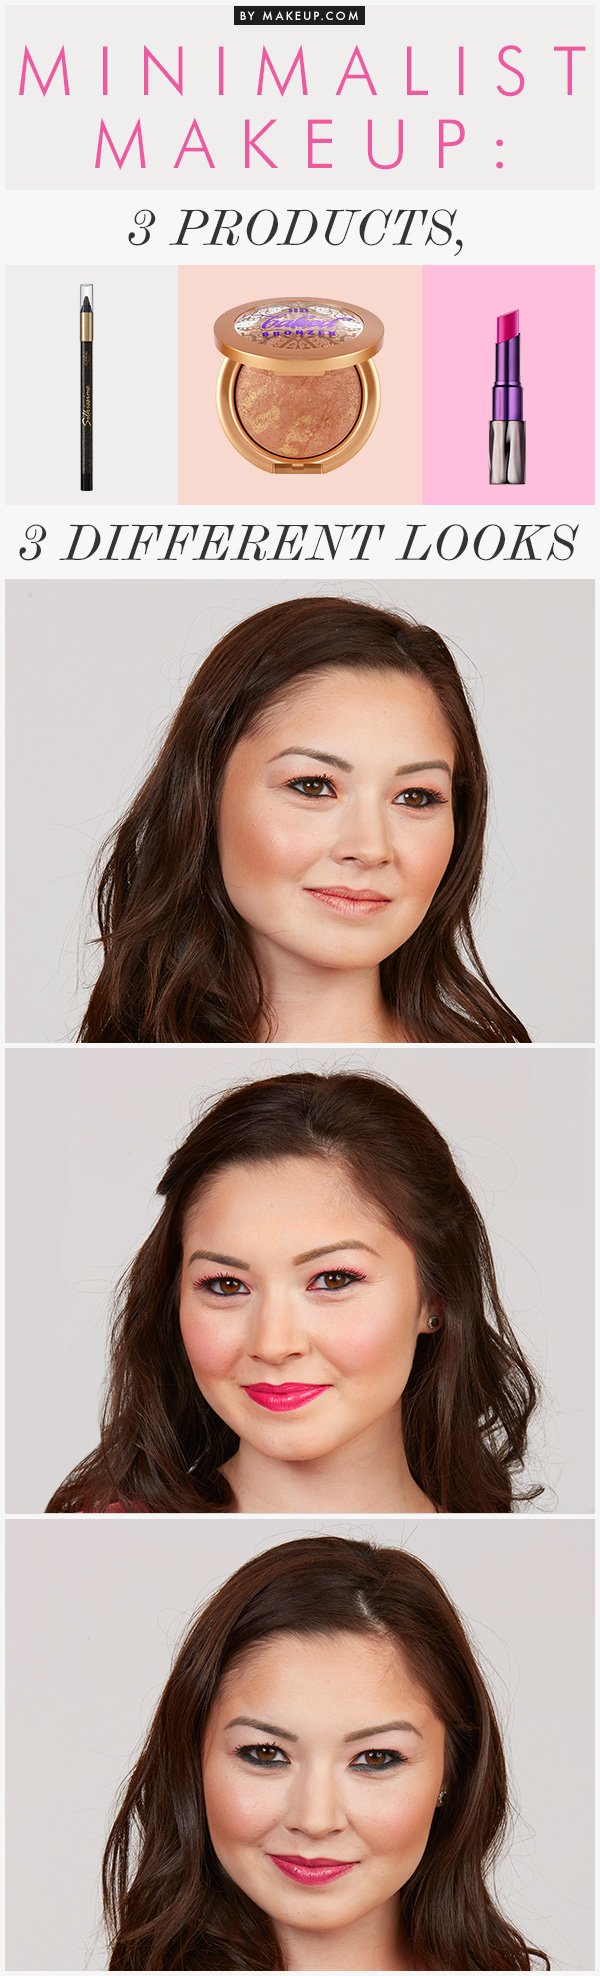 16 Makeup Tricks For Flawless Look Every Woman Should Know (5)